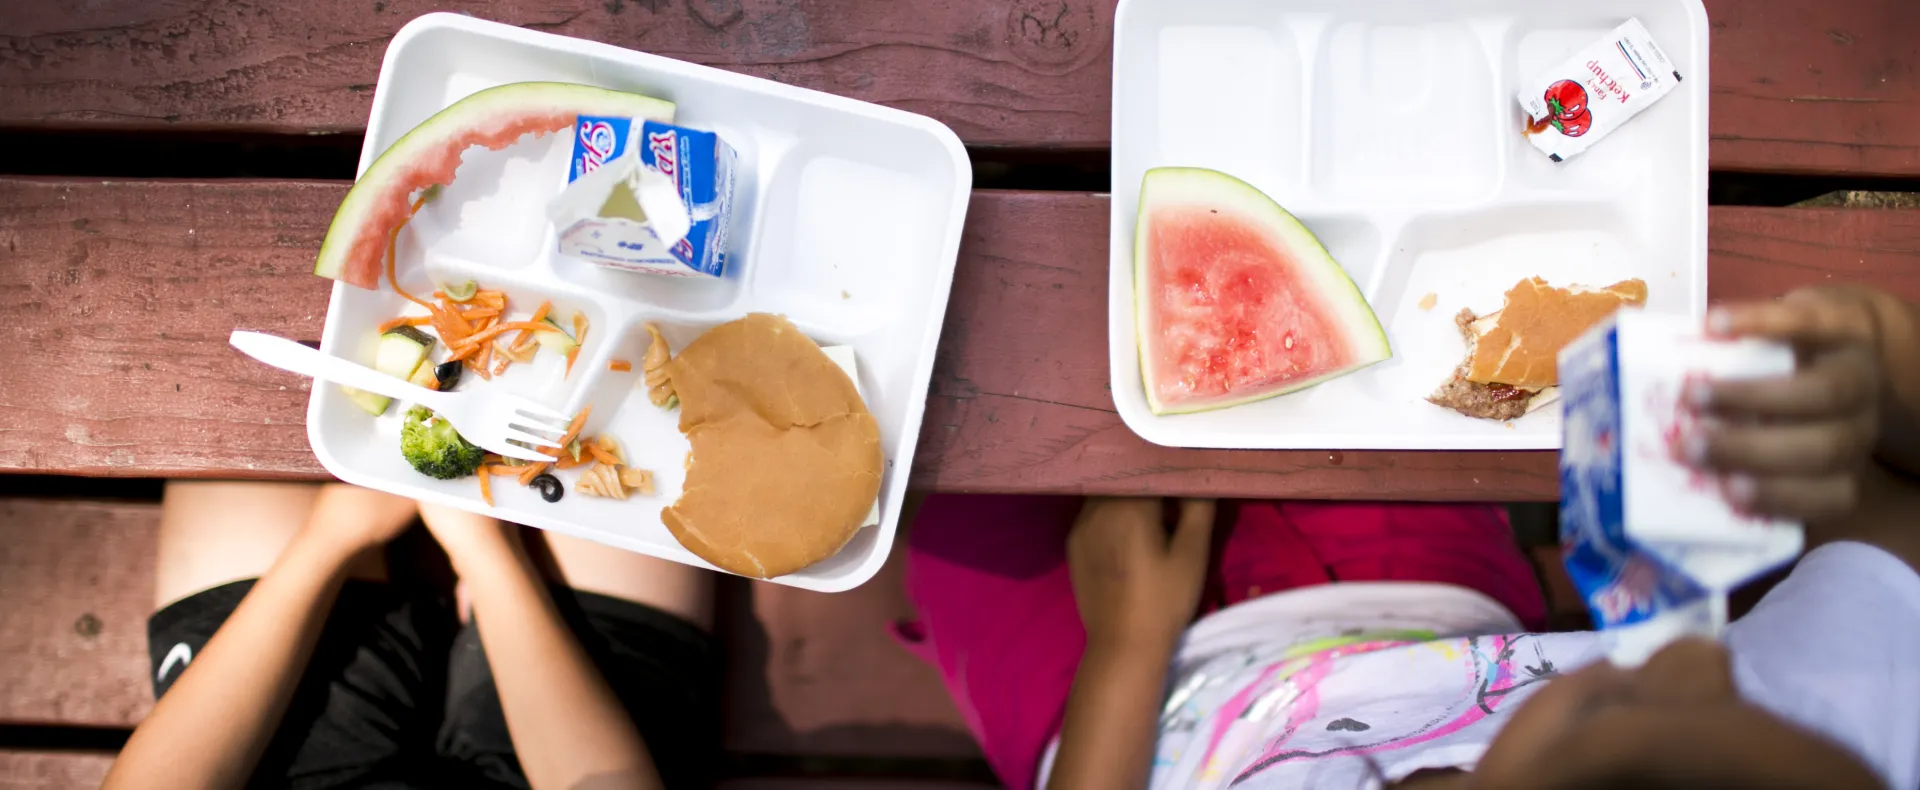 Summer meals on outdoor picnic table